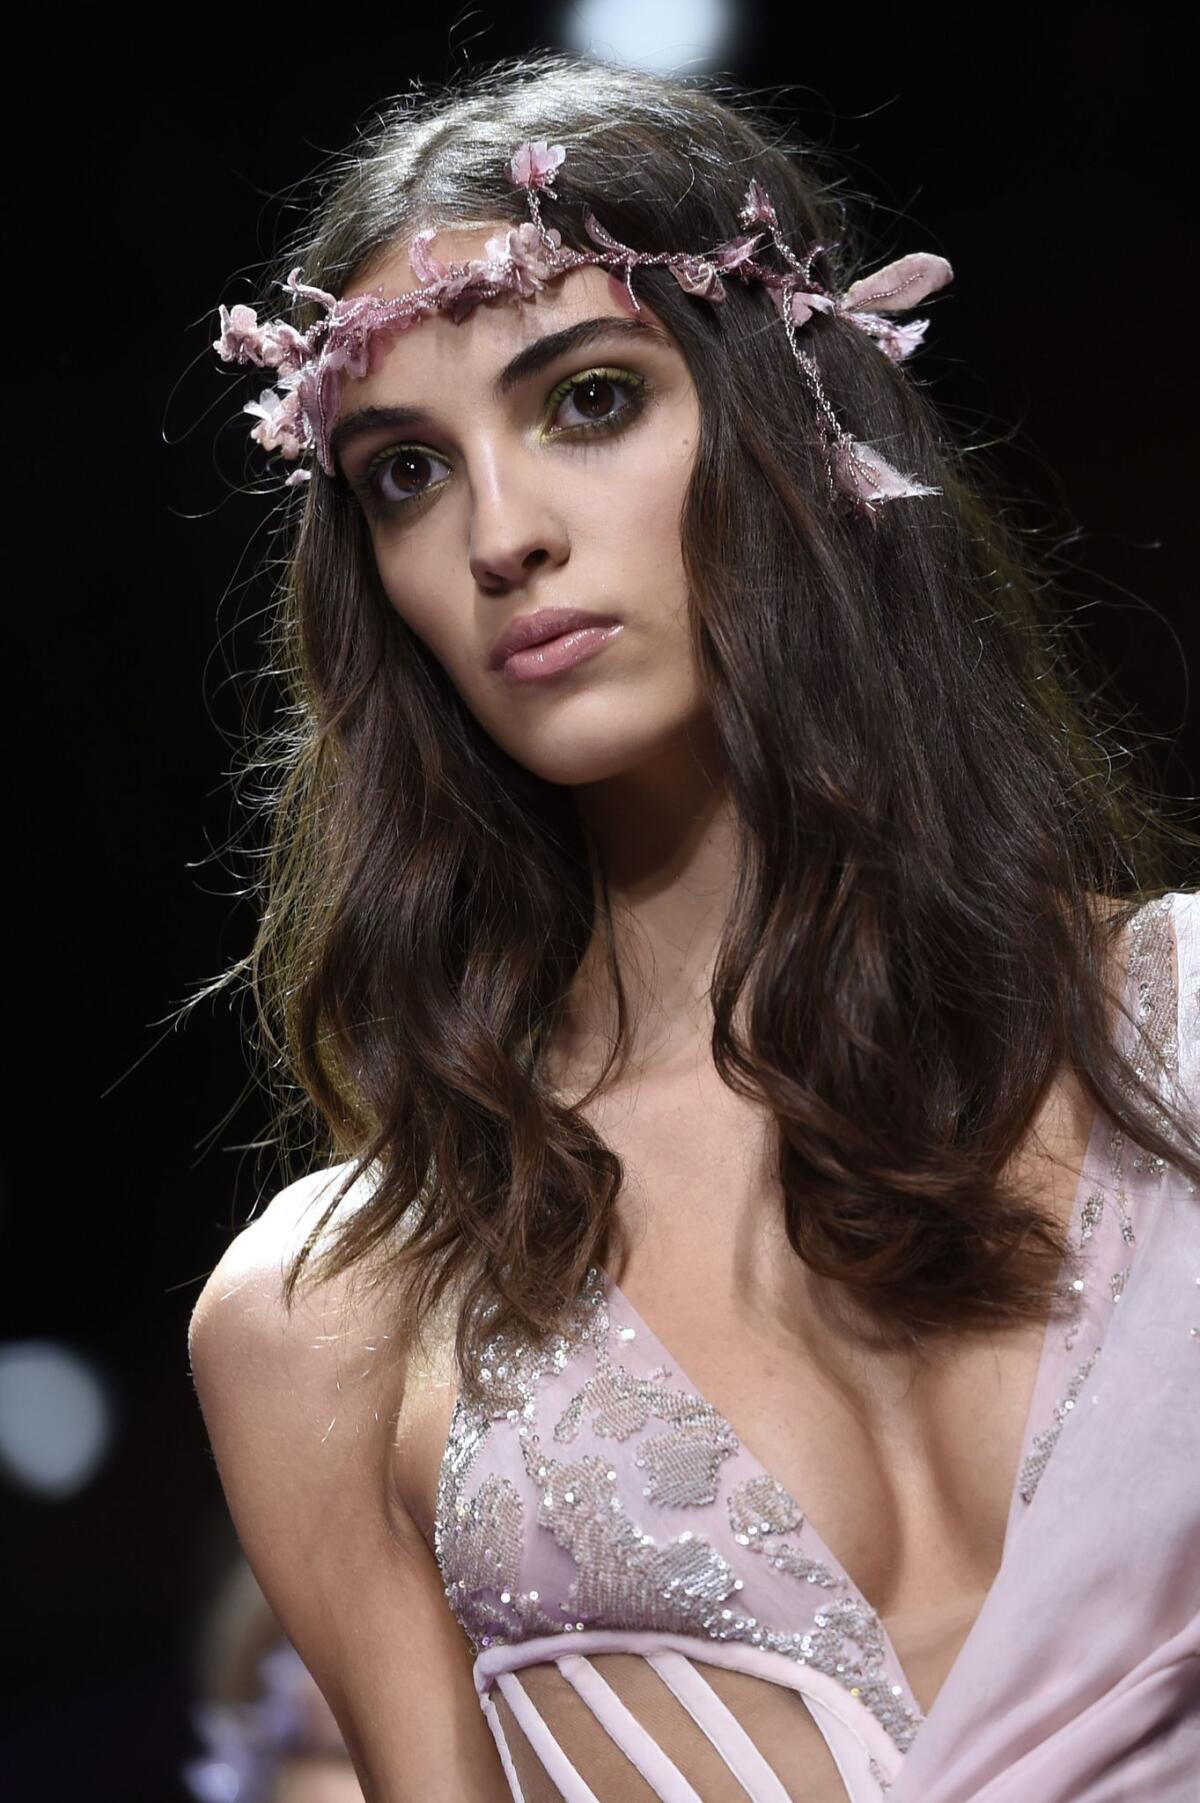 A model wears a floral headband during Versace fashion show.